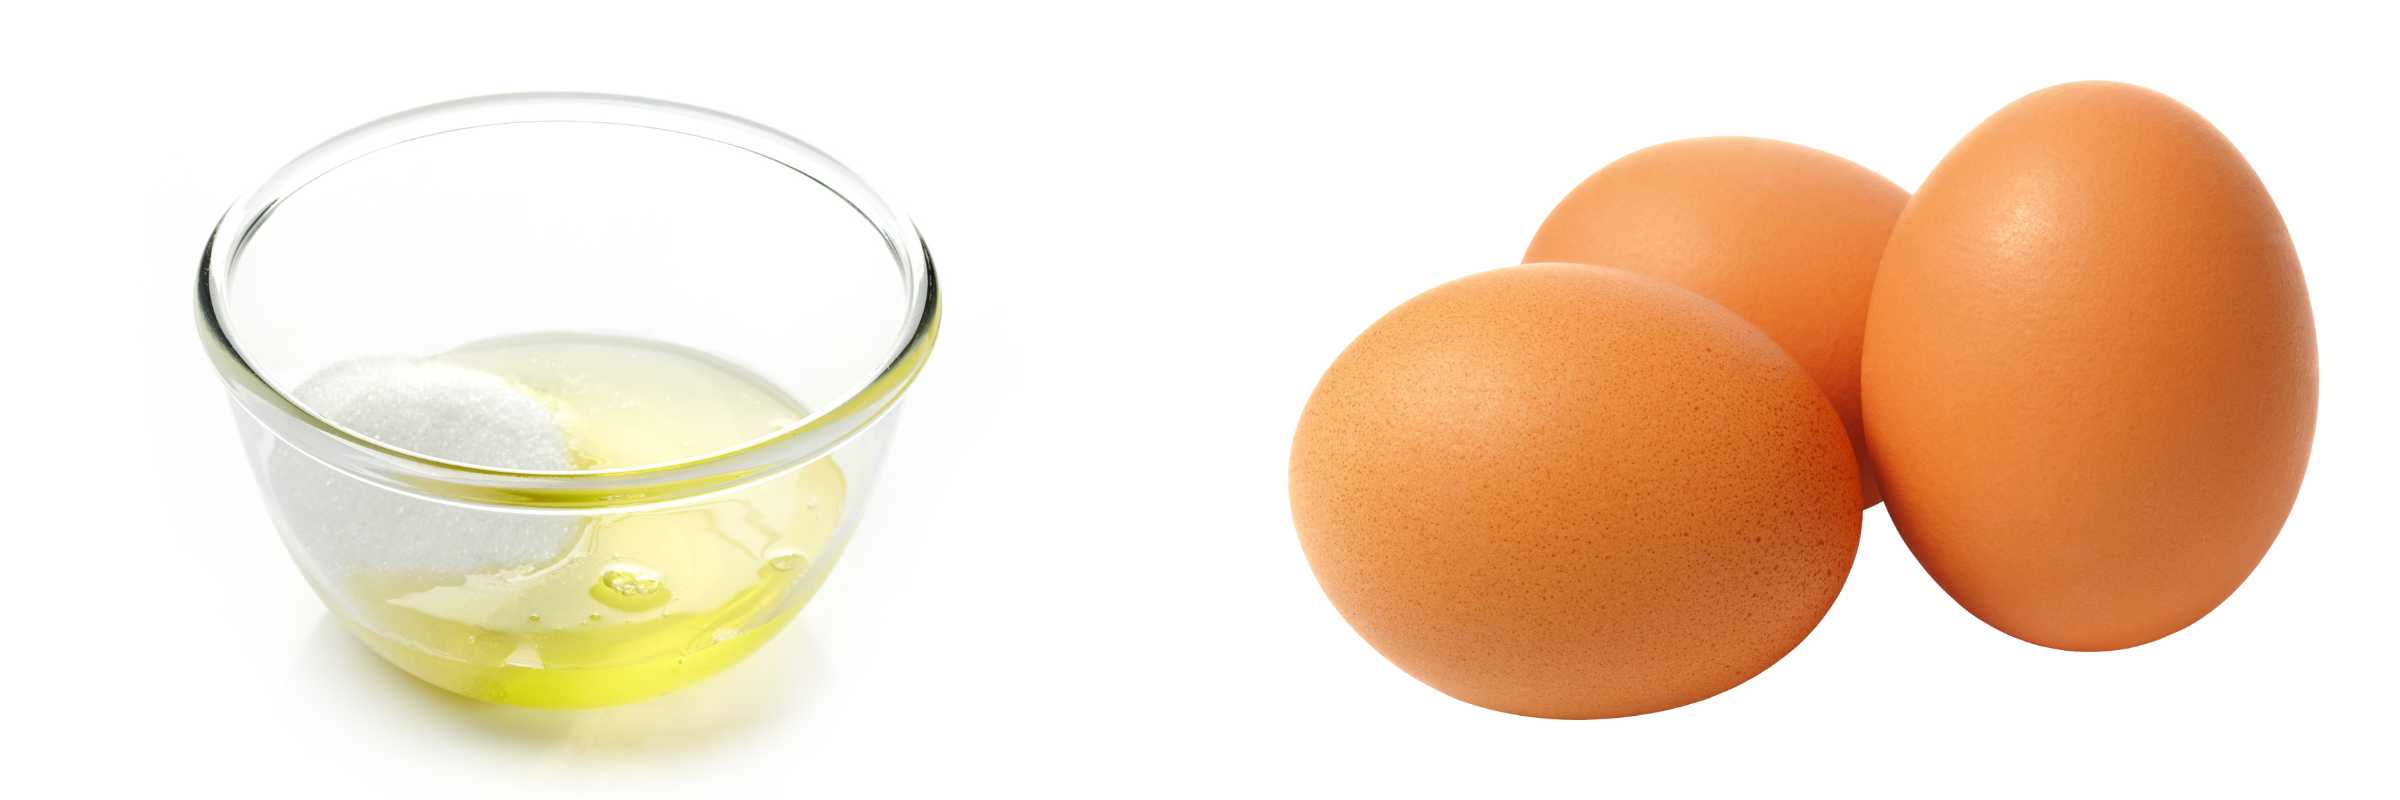 Champagne Fining Process Ingredient - Eggs